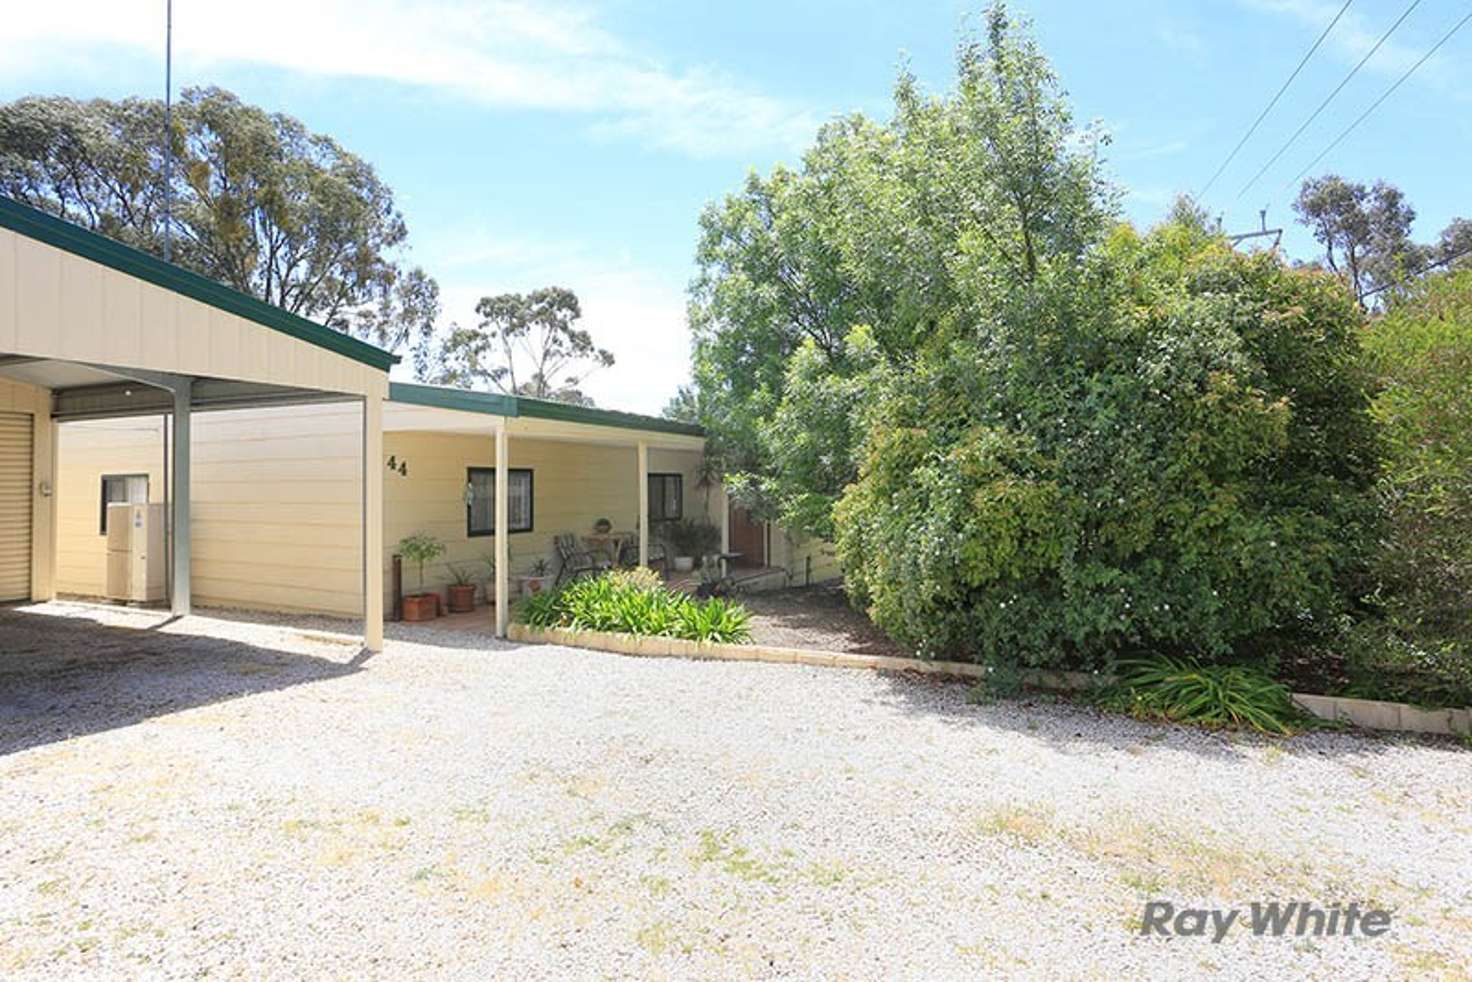 Main view of Homely house listing, 44 Warenda Road, Clare SA 5453